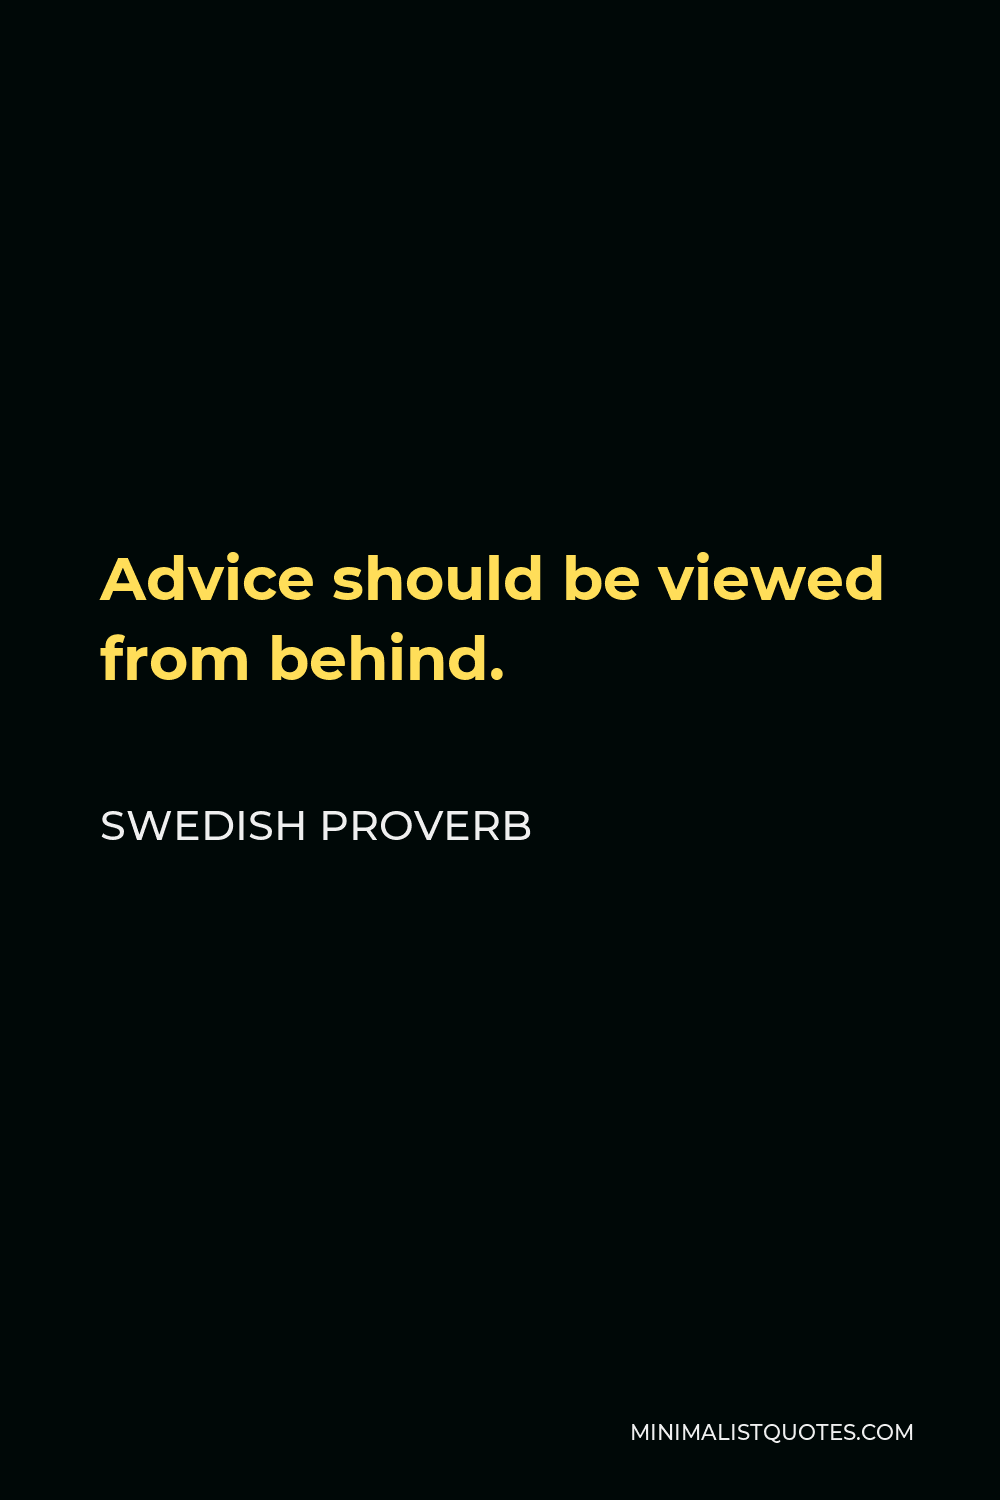 Swedish Proverb Quote - Advice should be viewed from behind.